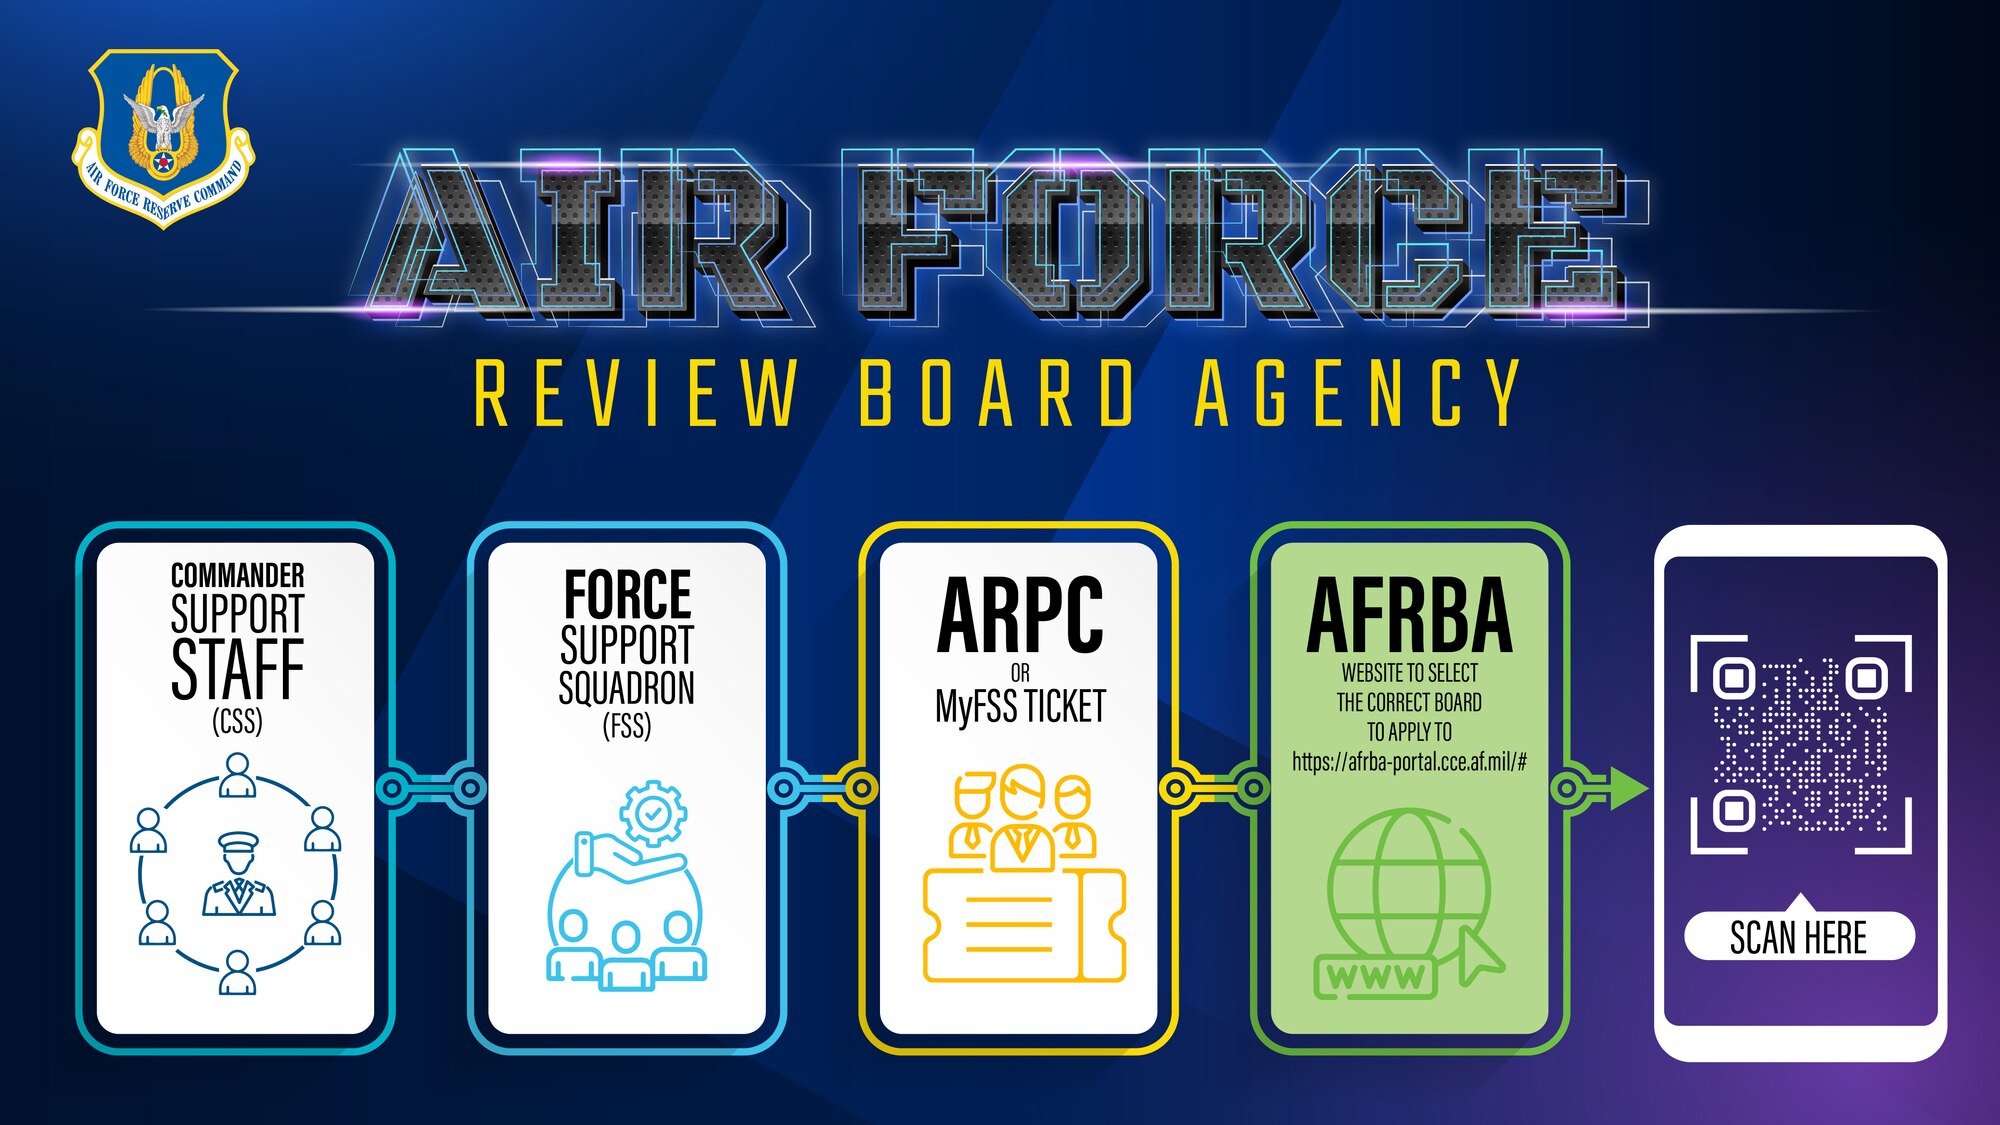 Air Force Review Board Agency graphic.